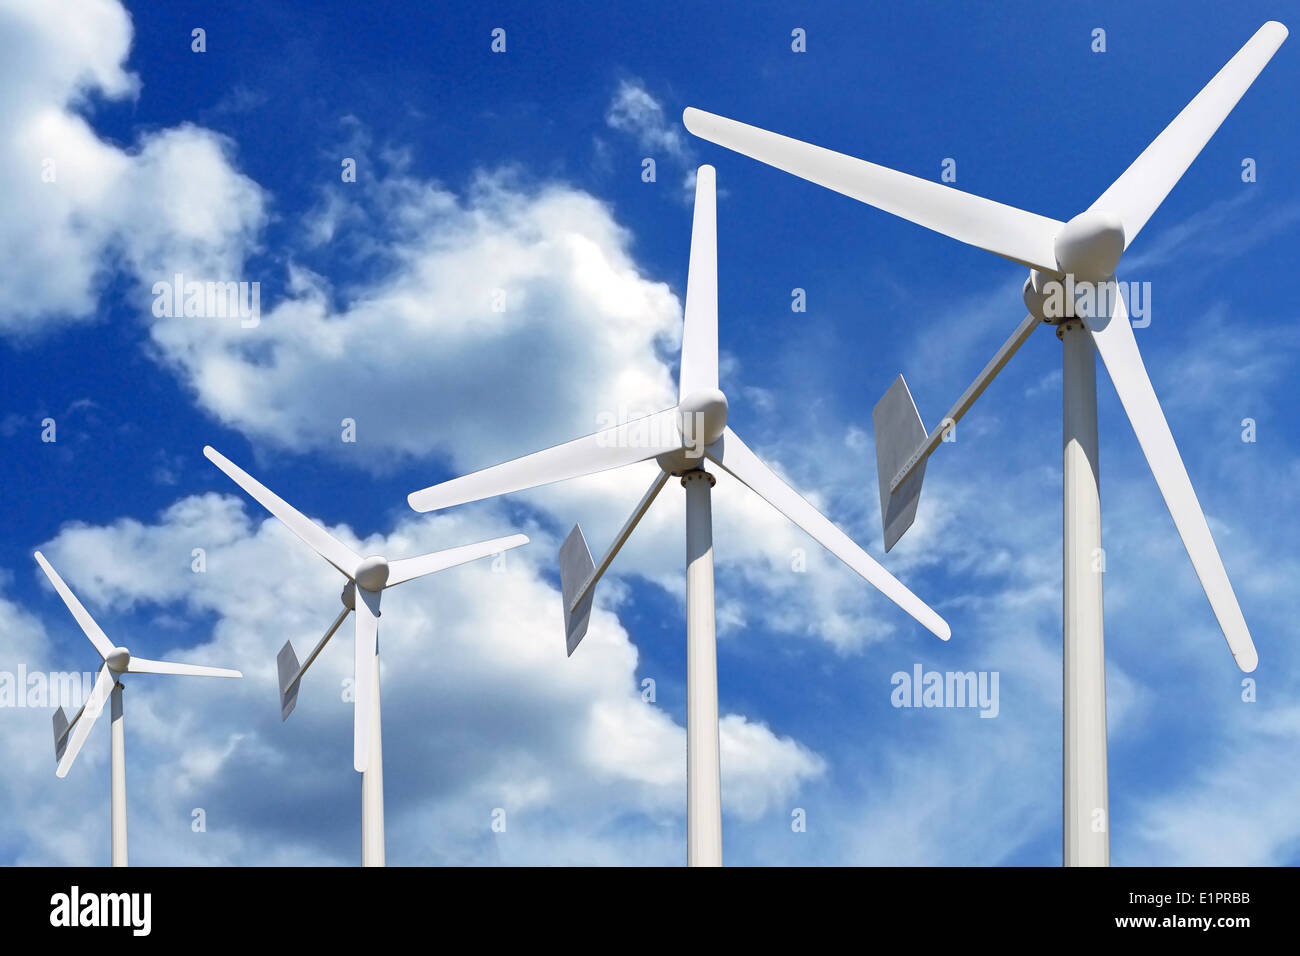 more wind turbines online blue sky with clouds Stock Photo